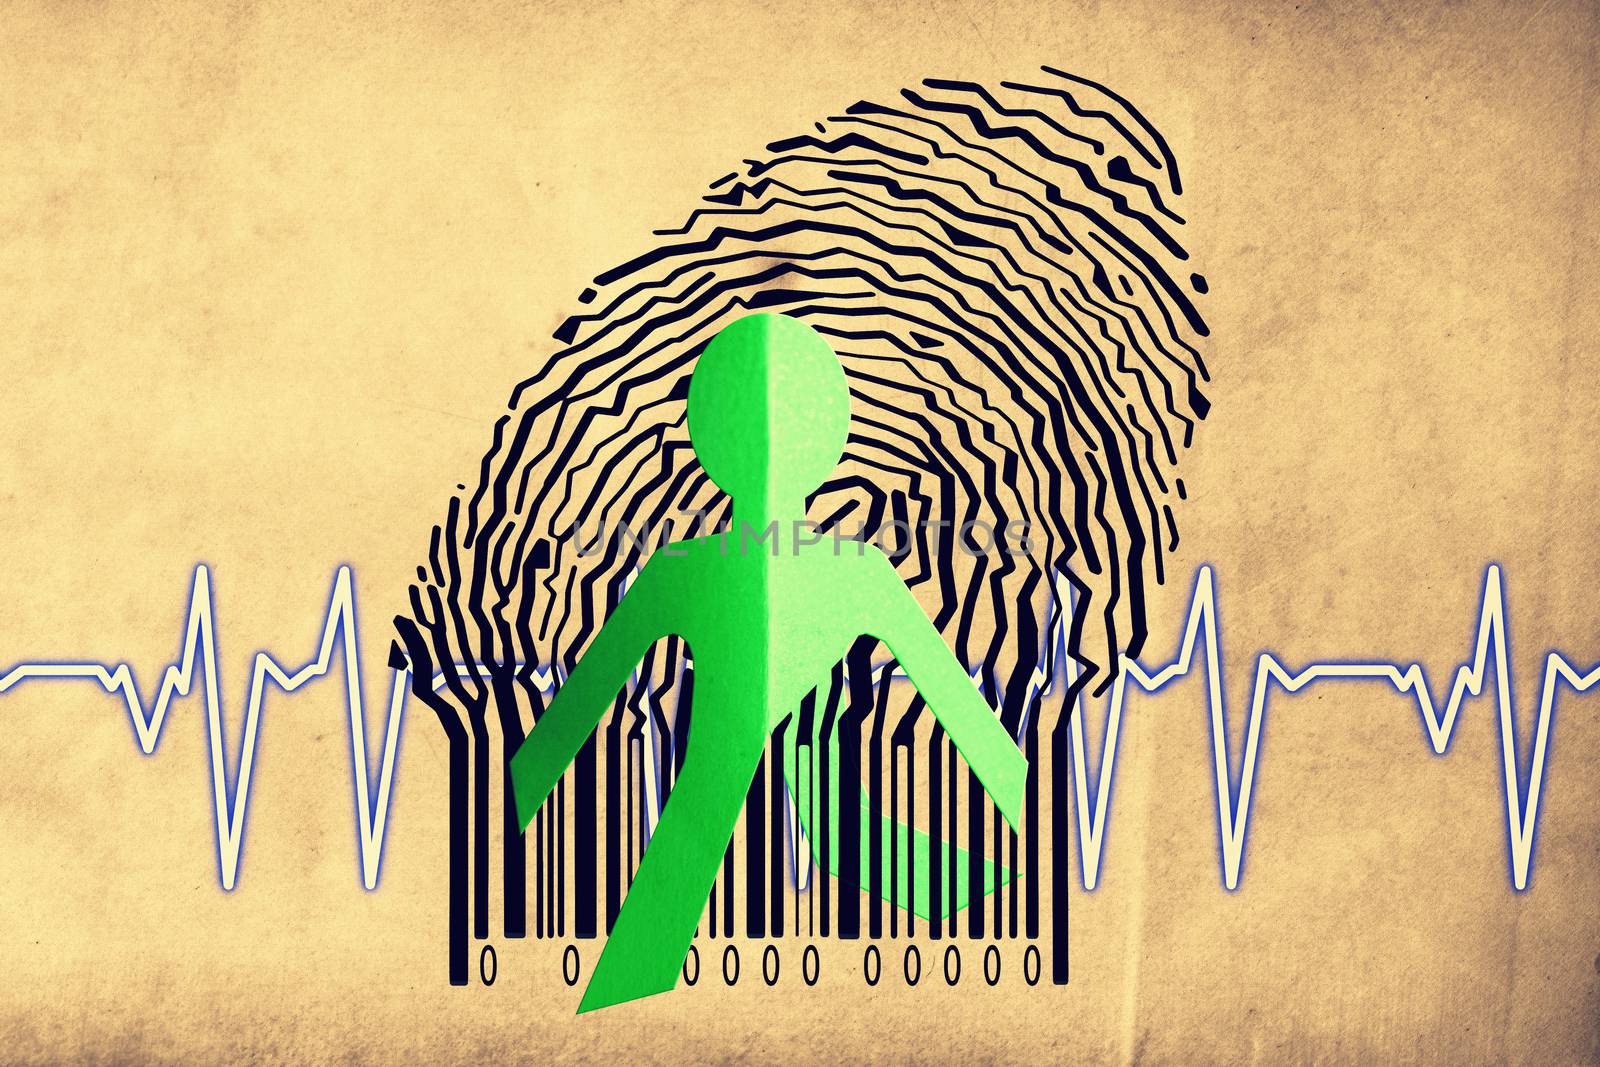 Paperman coming out of a bar code with cardiogram by yands